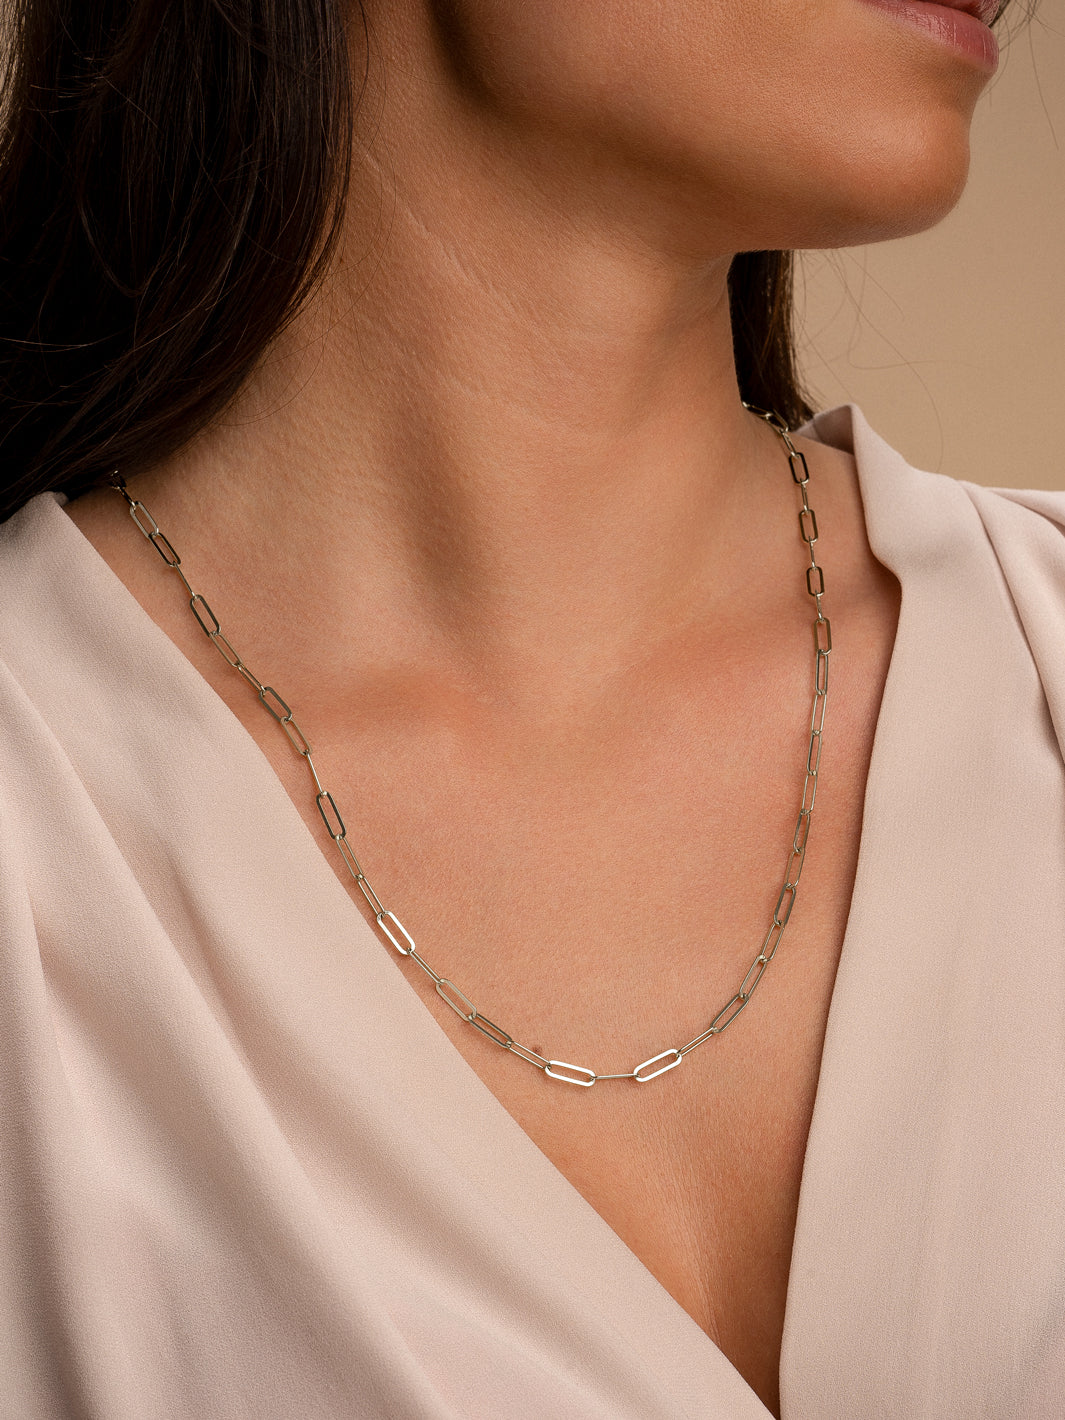 Lung link necklace | Silver